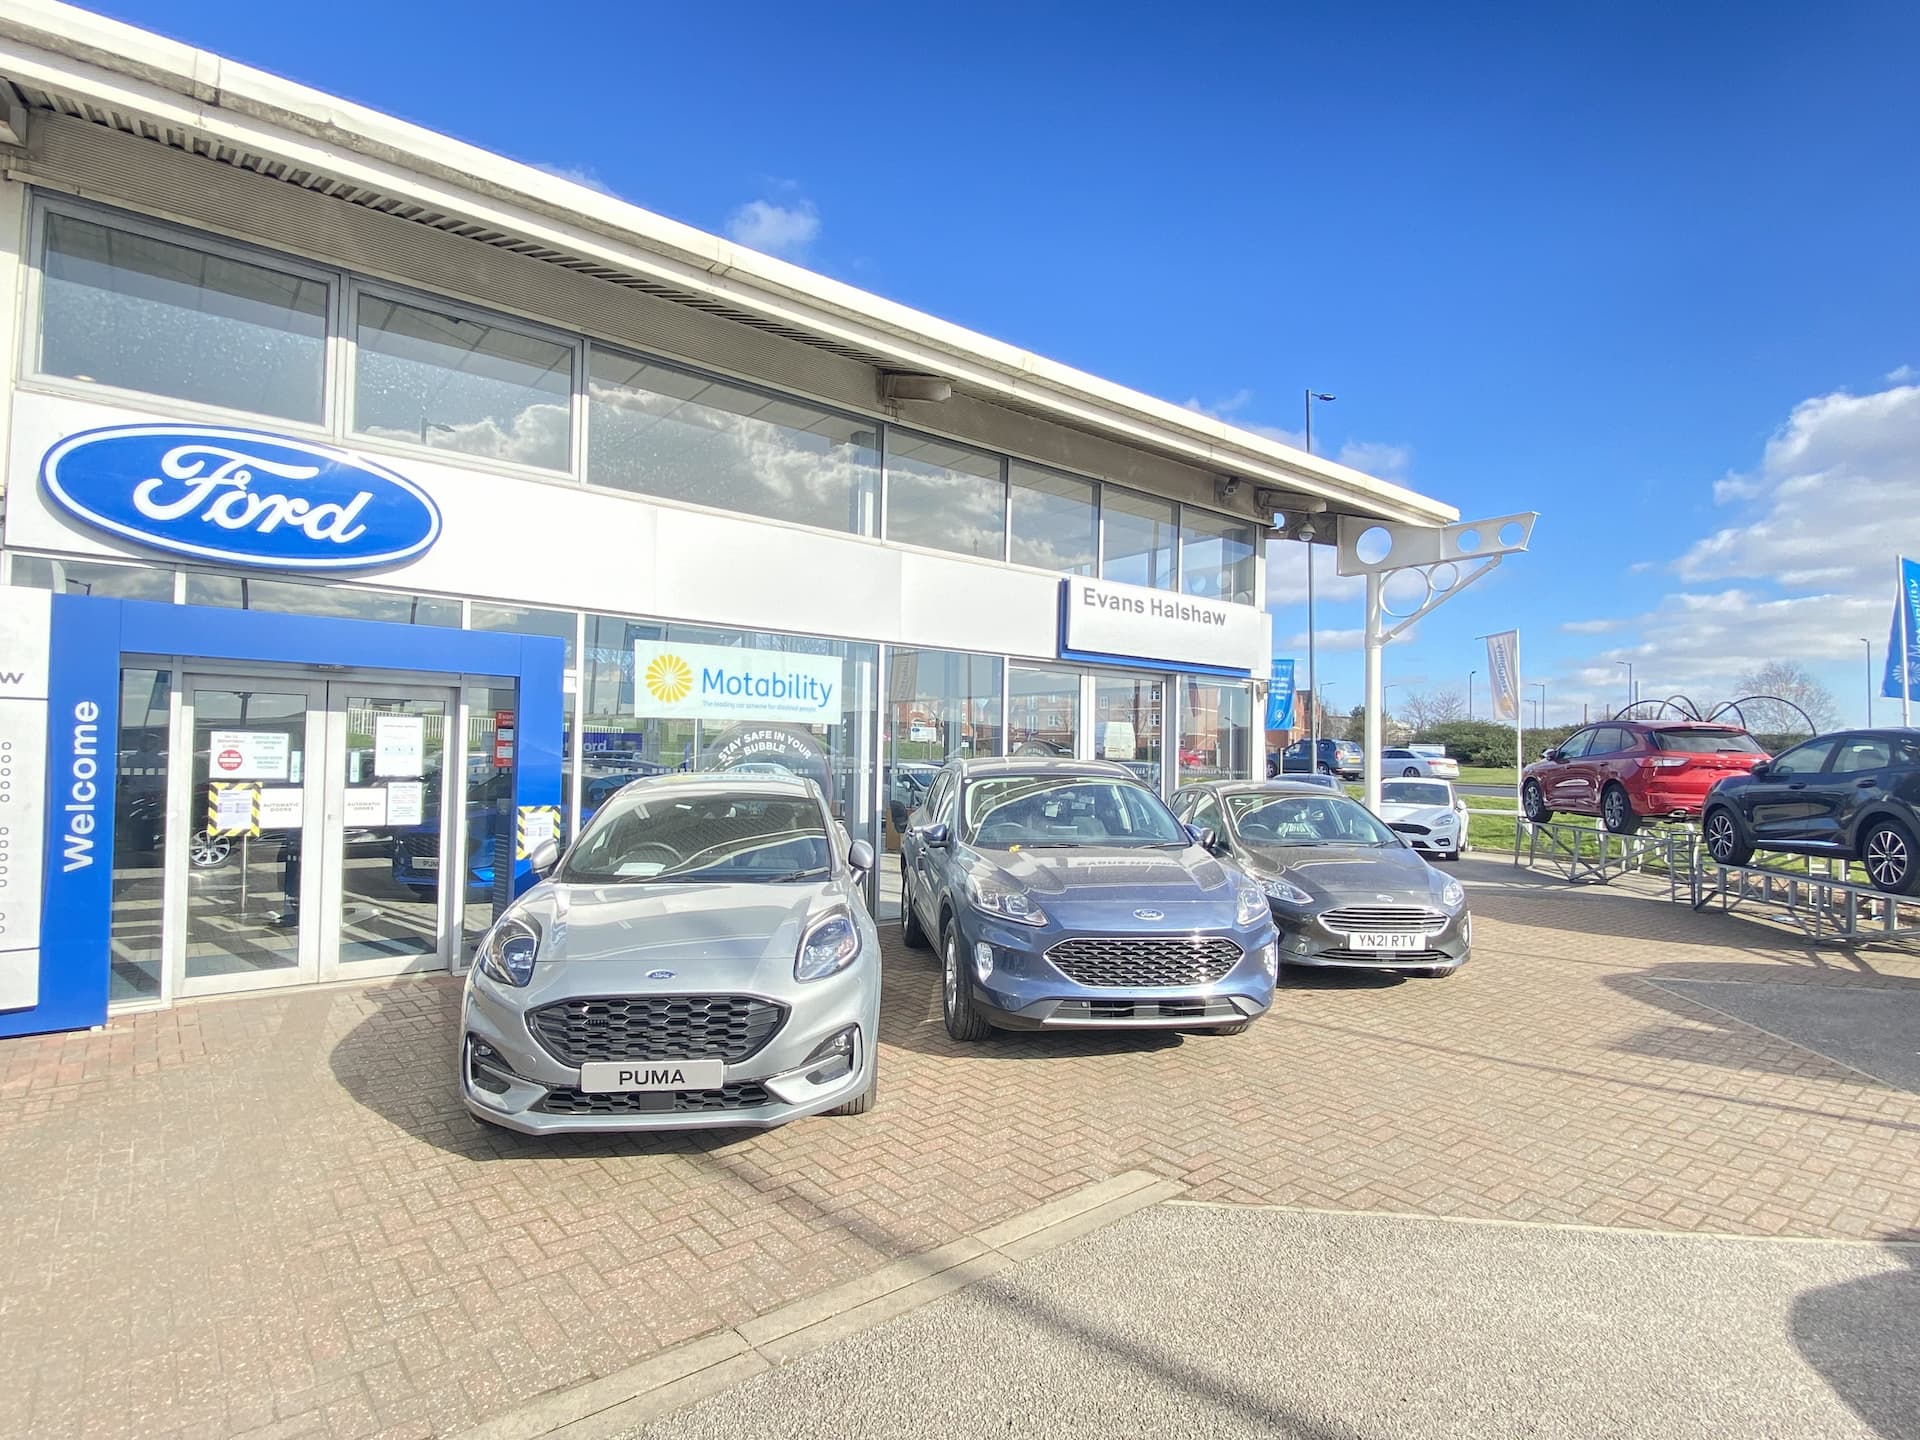 Front of the Ford Rotherham dealership